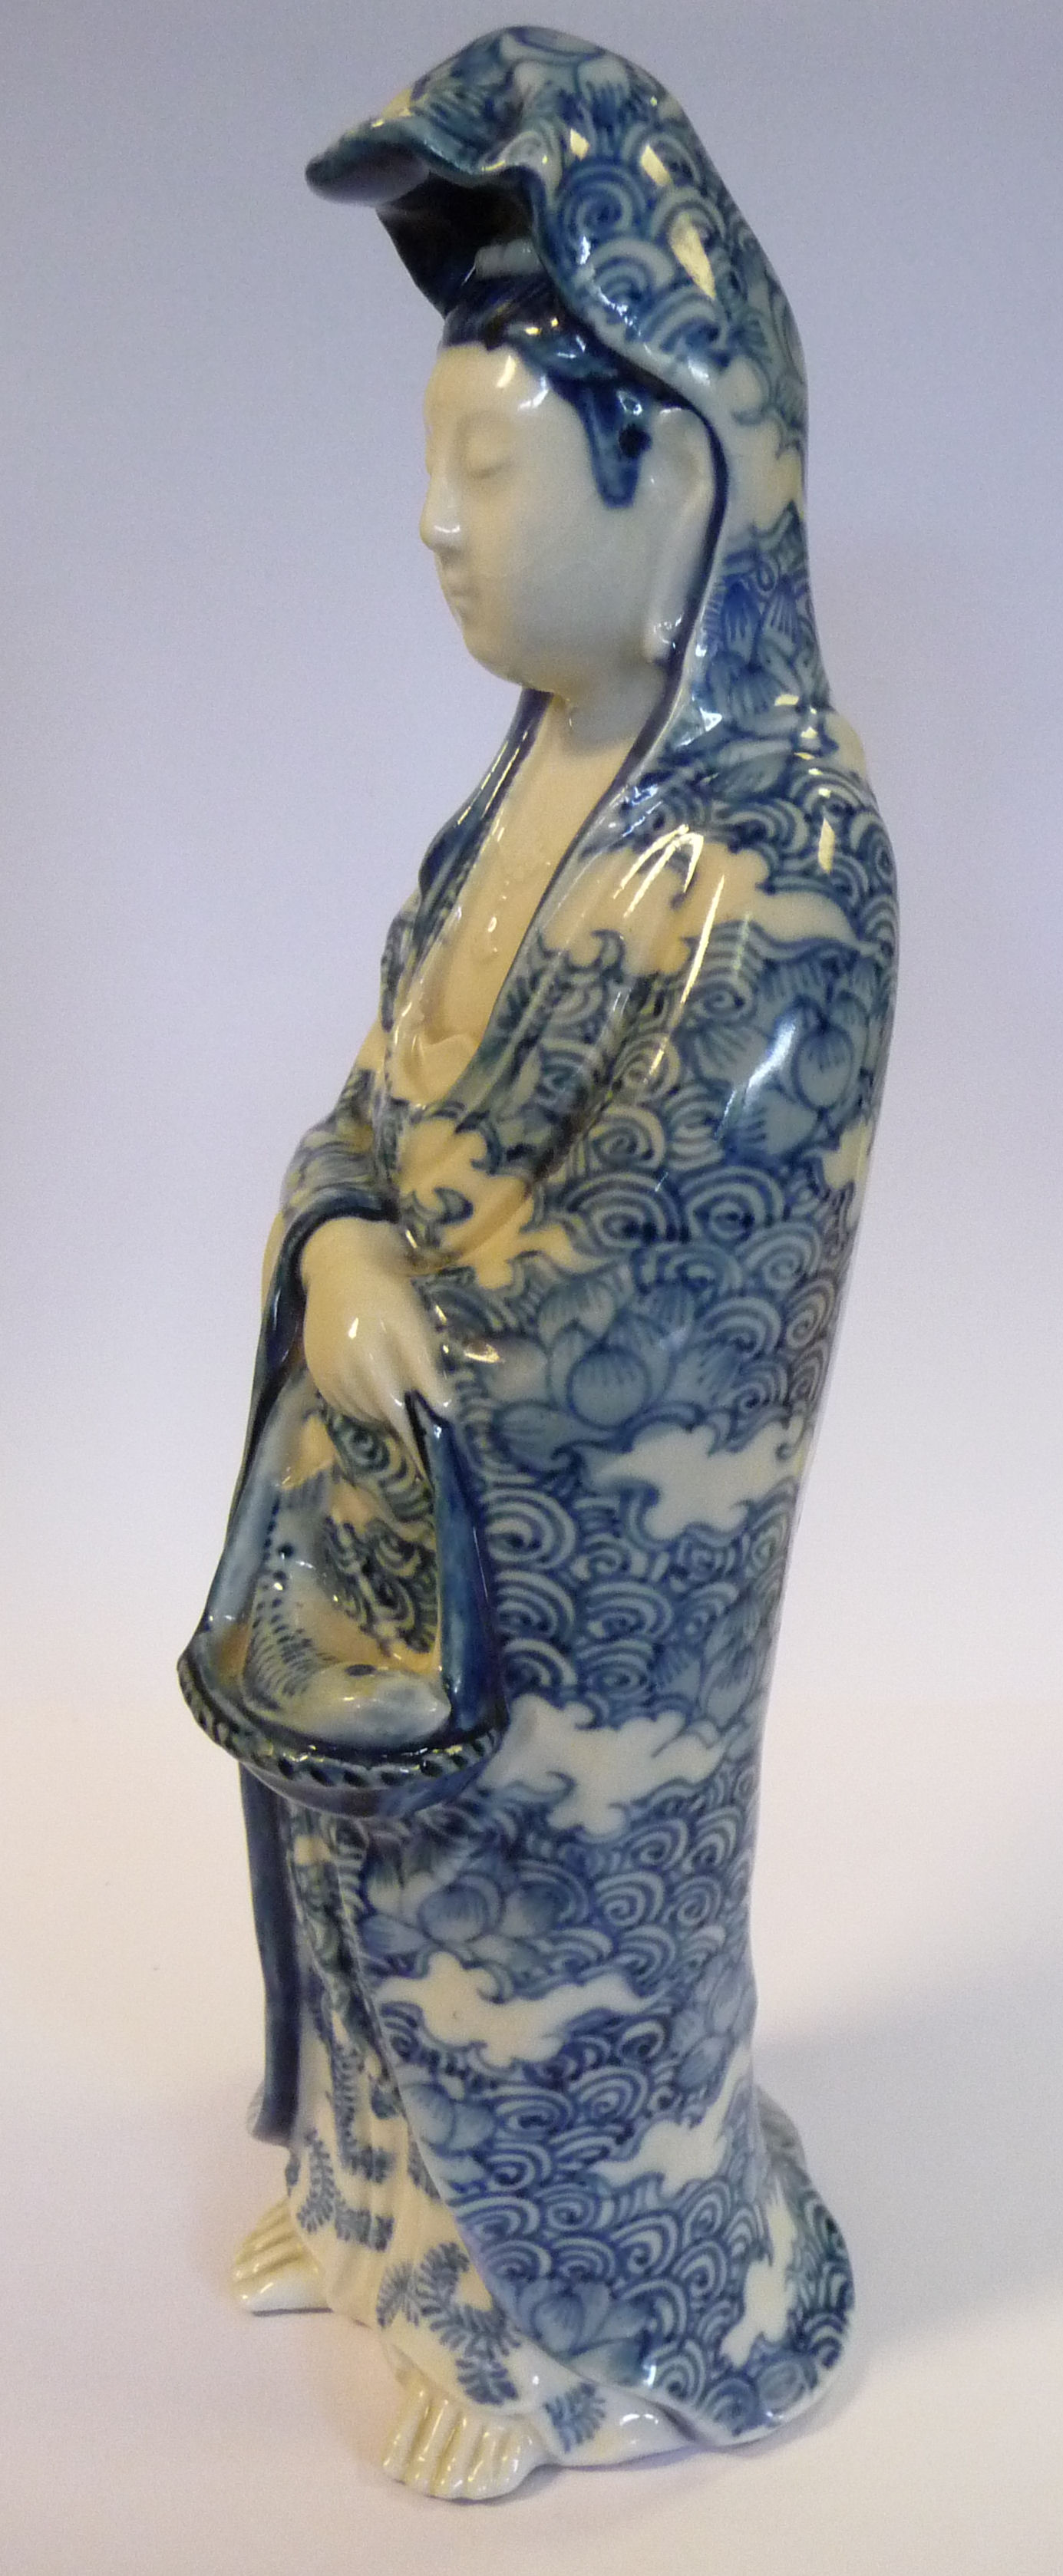 An early 20thC Chinese porcelain standing figure, Guan Yin, holding a basket of fish, - Image 3 of 11